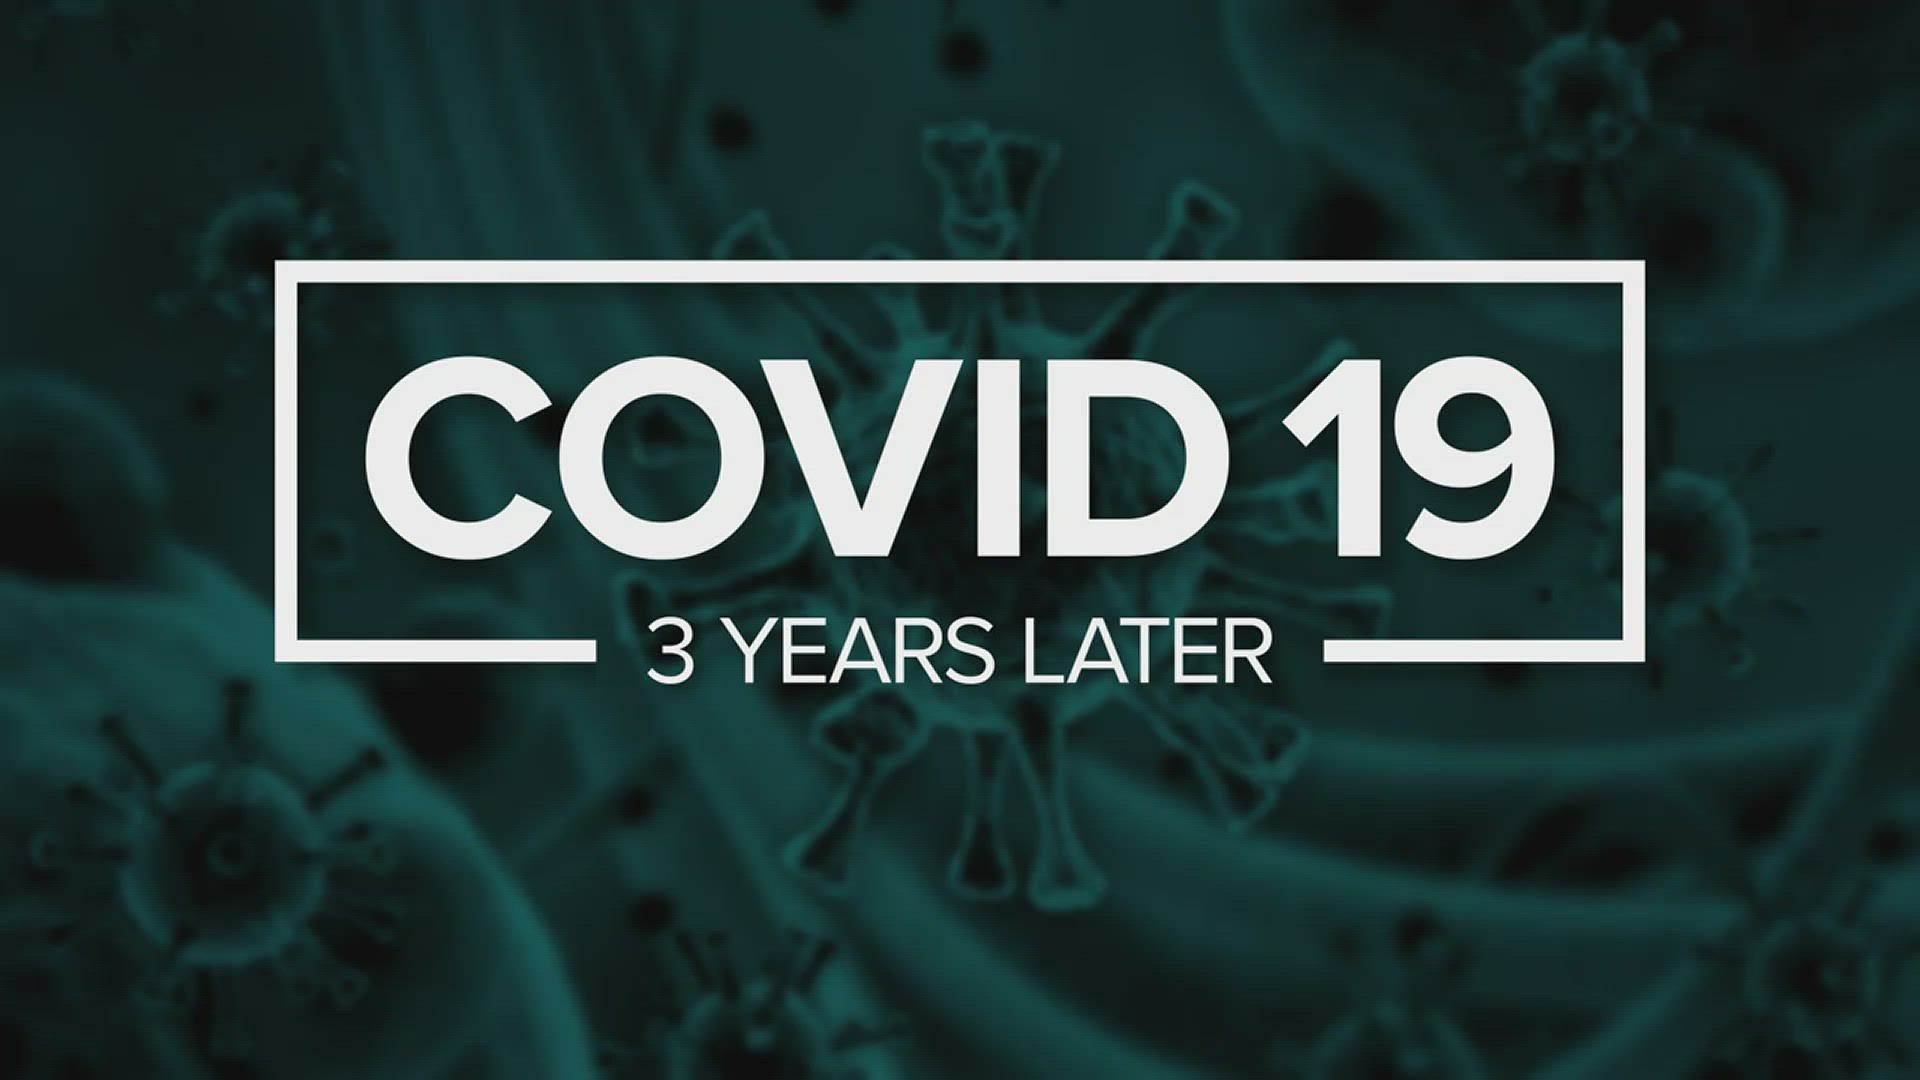 March 11, 2020, is when the World Health Organization declared COVID-19 a global pandemic. Take a look at how prices for basic consumer items compare, then to now.